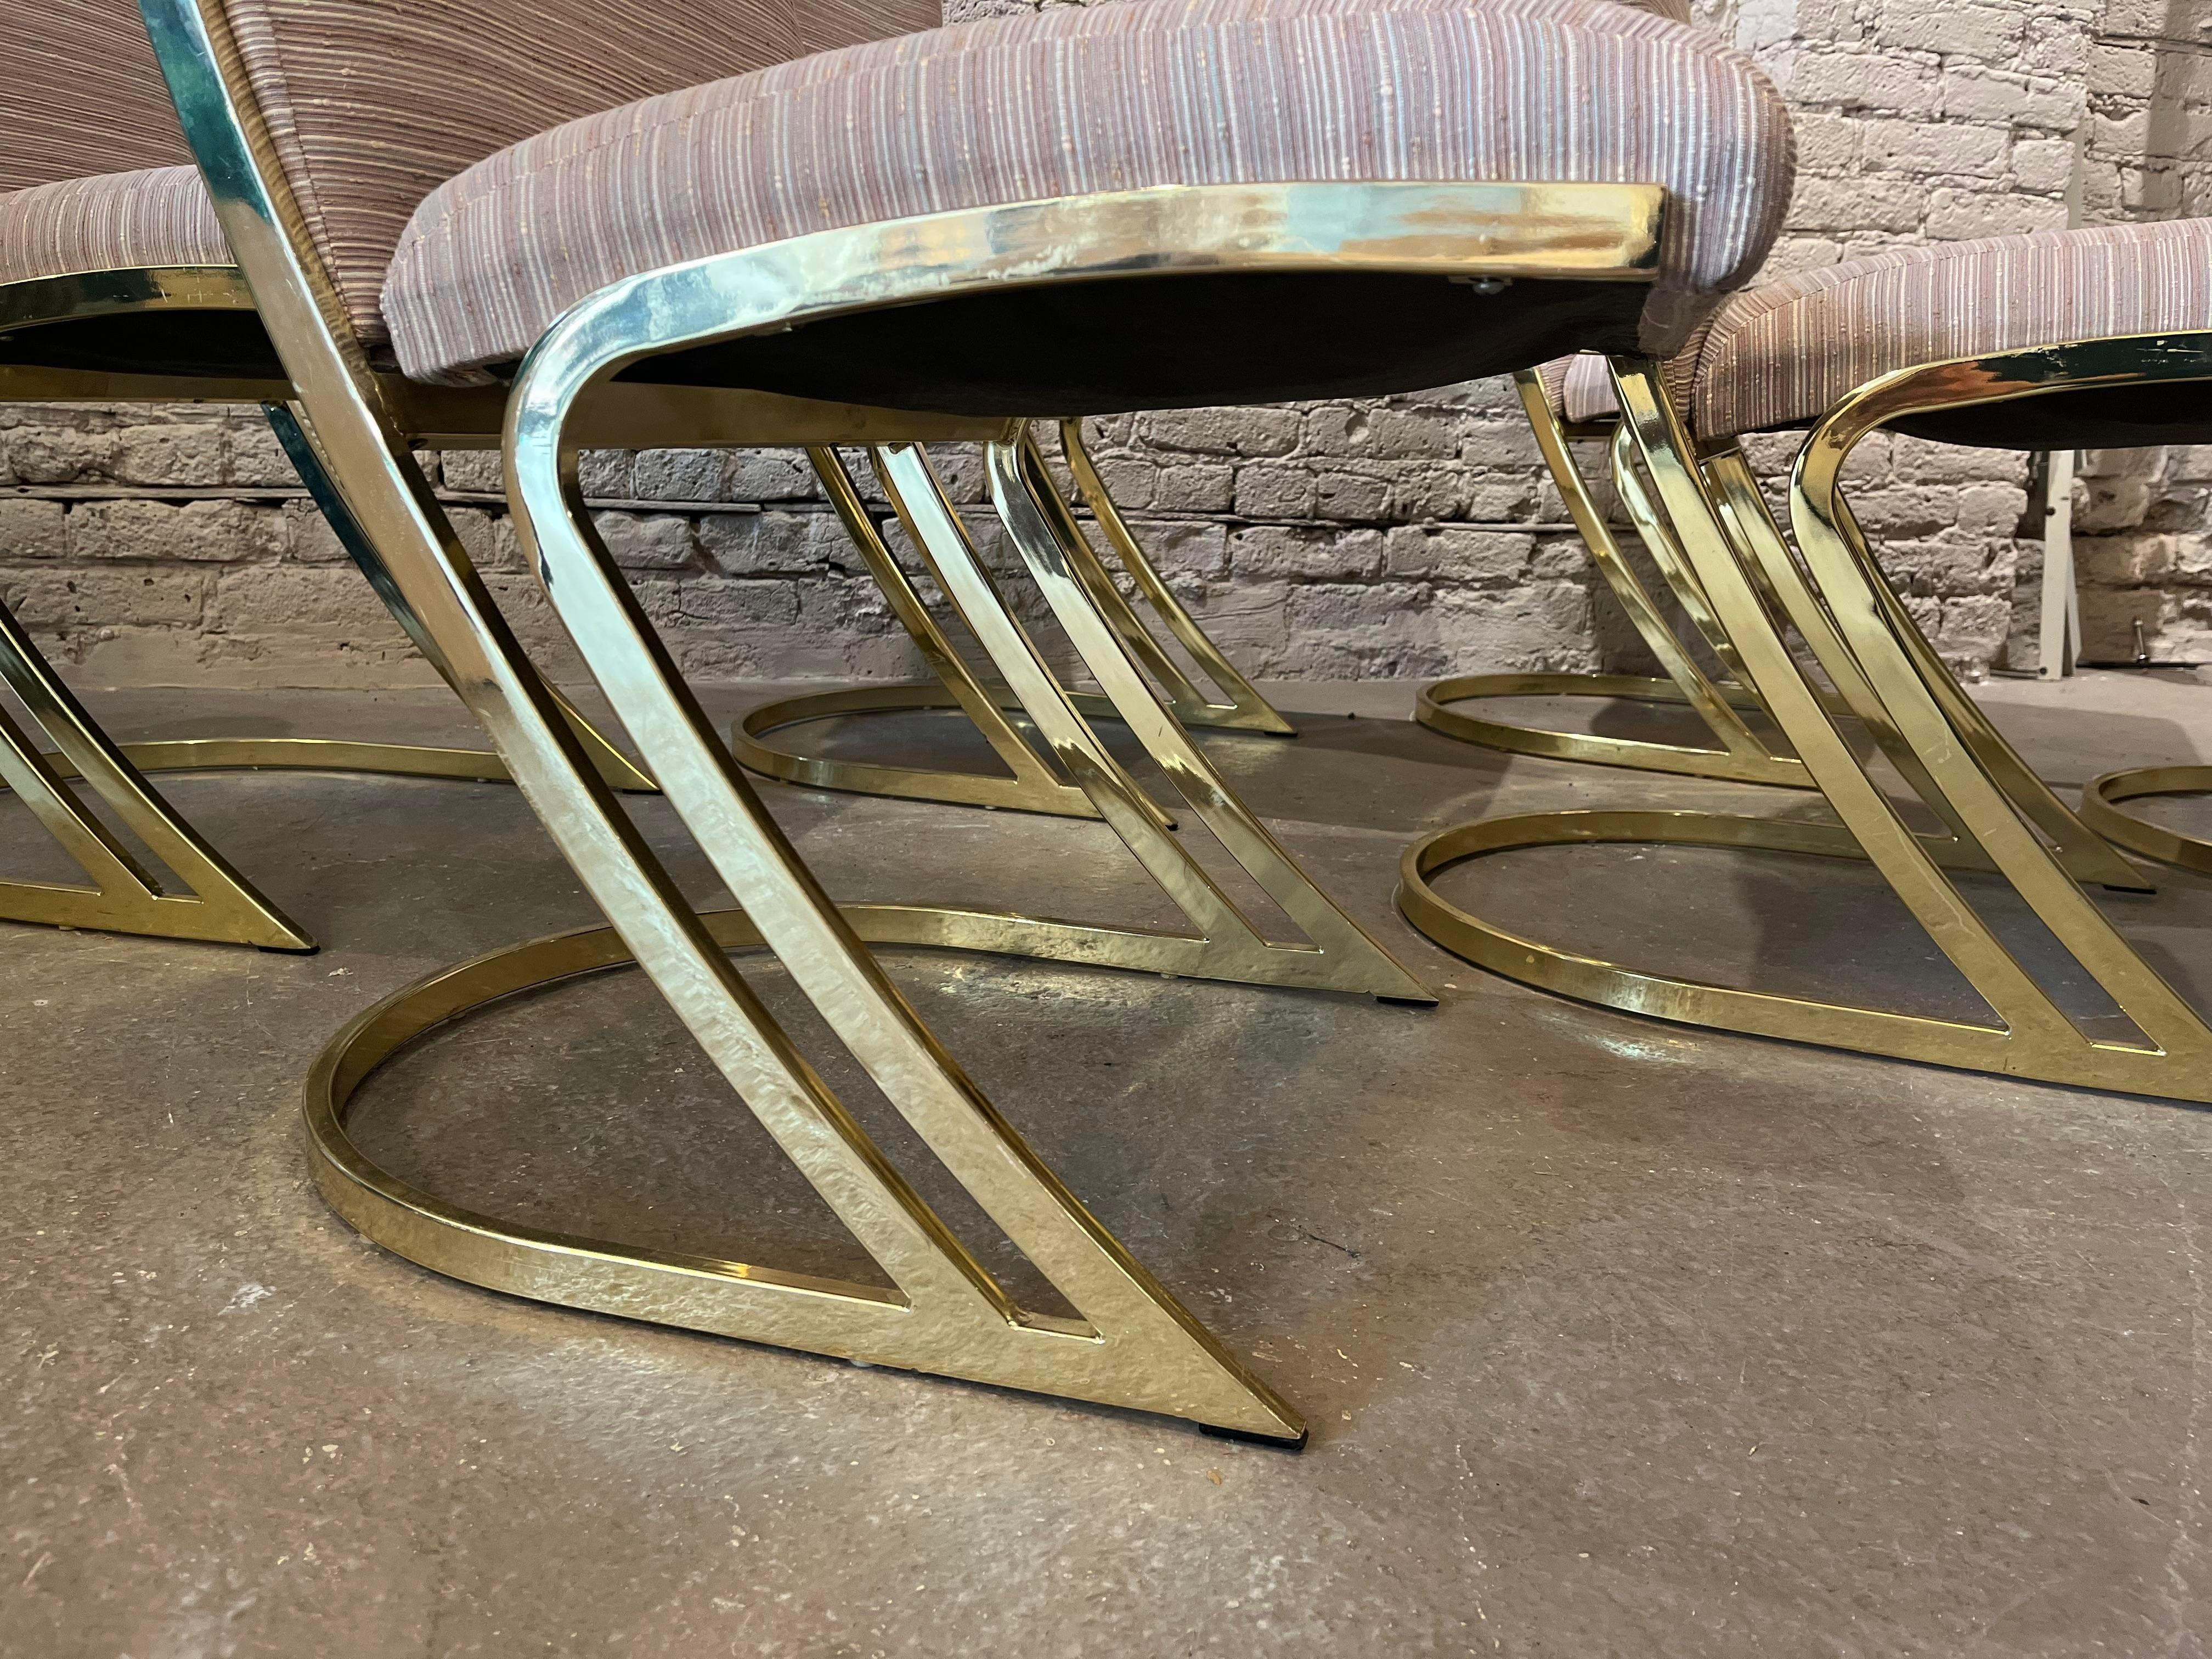 Set of 6 Pierre Cardin brass dining chairs manufactured by Contemporary Shells of New York. Original upholstery in excellent condition.